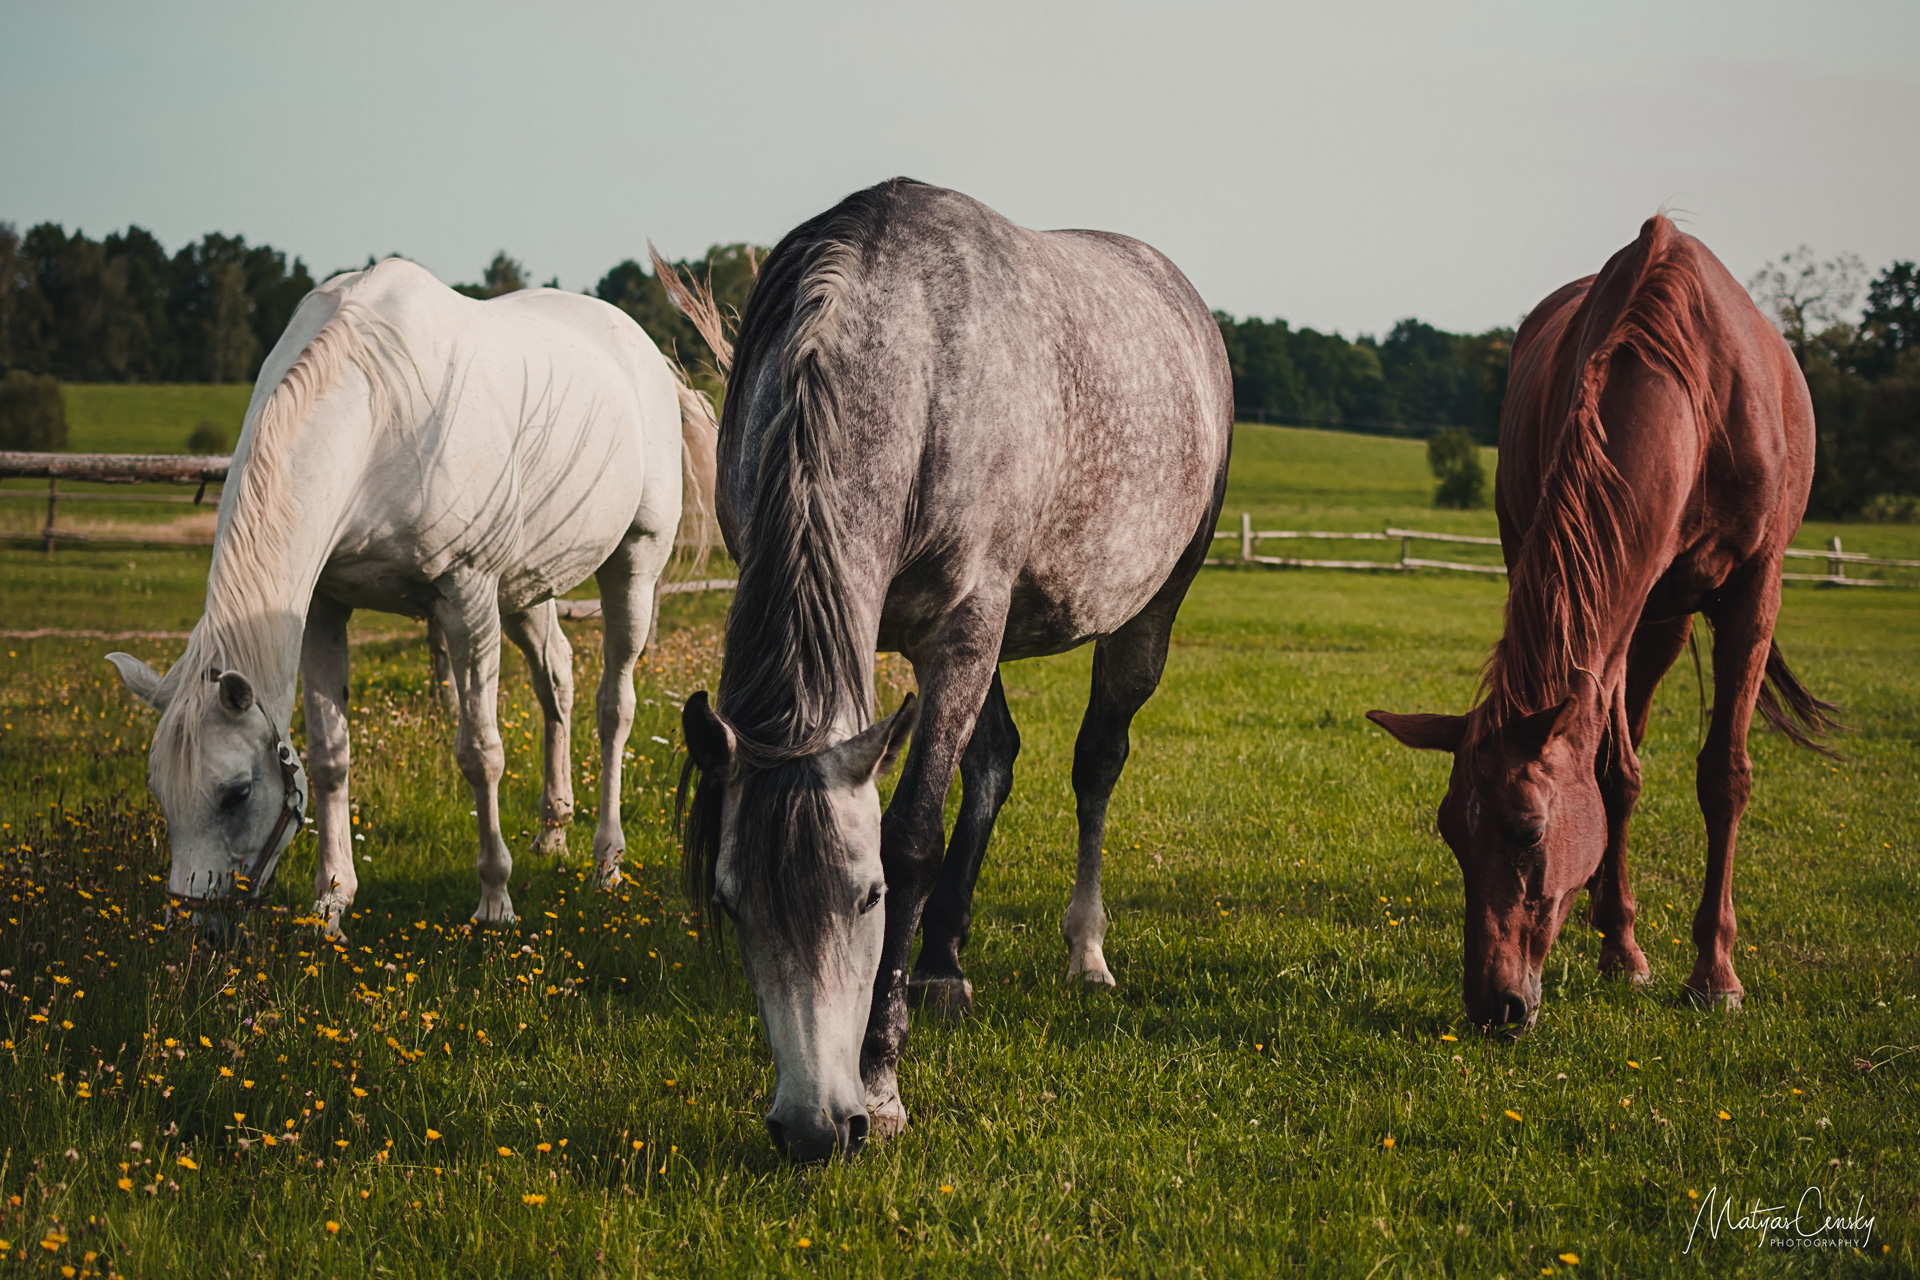 Photo of three horse, one white, one brown and one grey standing next to each other eating grass on a sunny field.